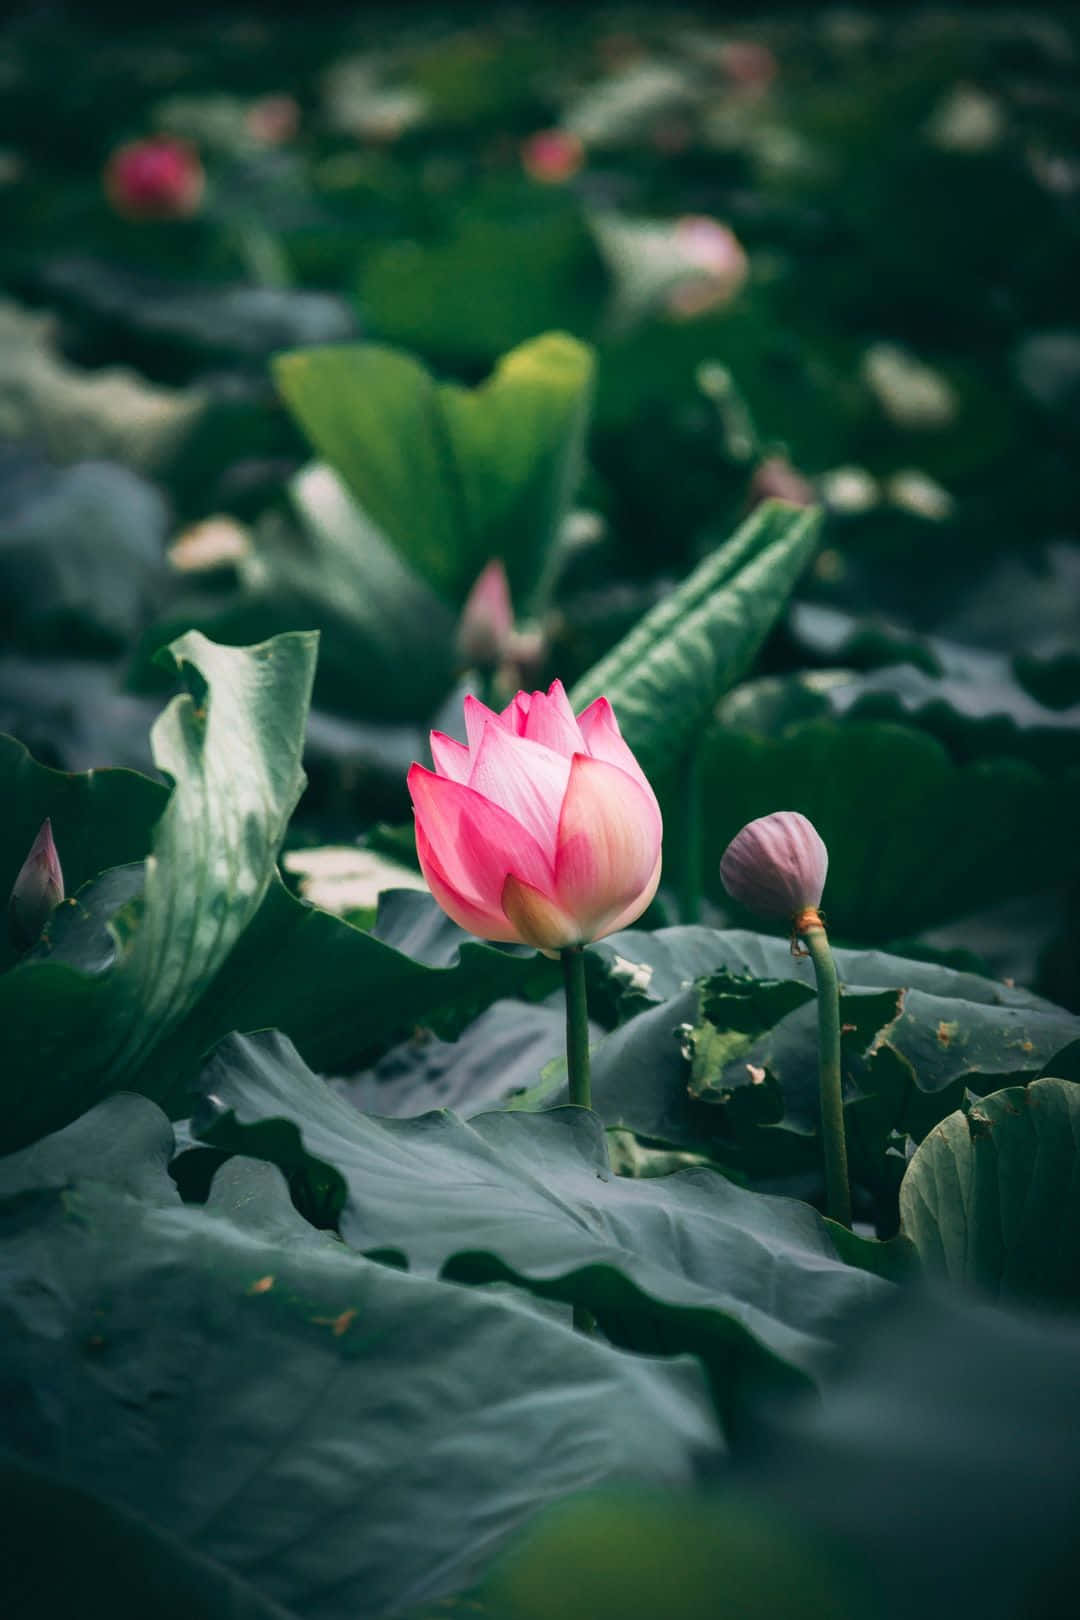 Serene Lotus Flower Blooming in a Tranquil Pond